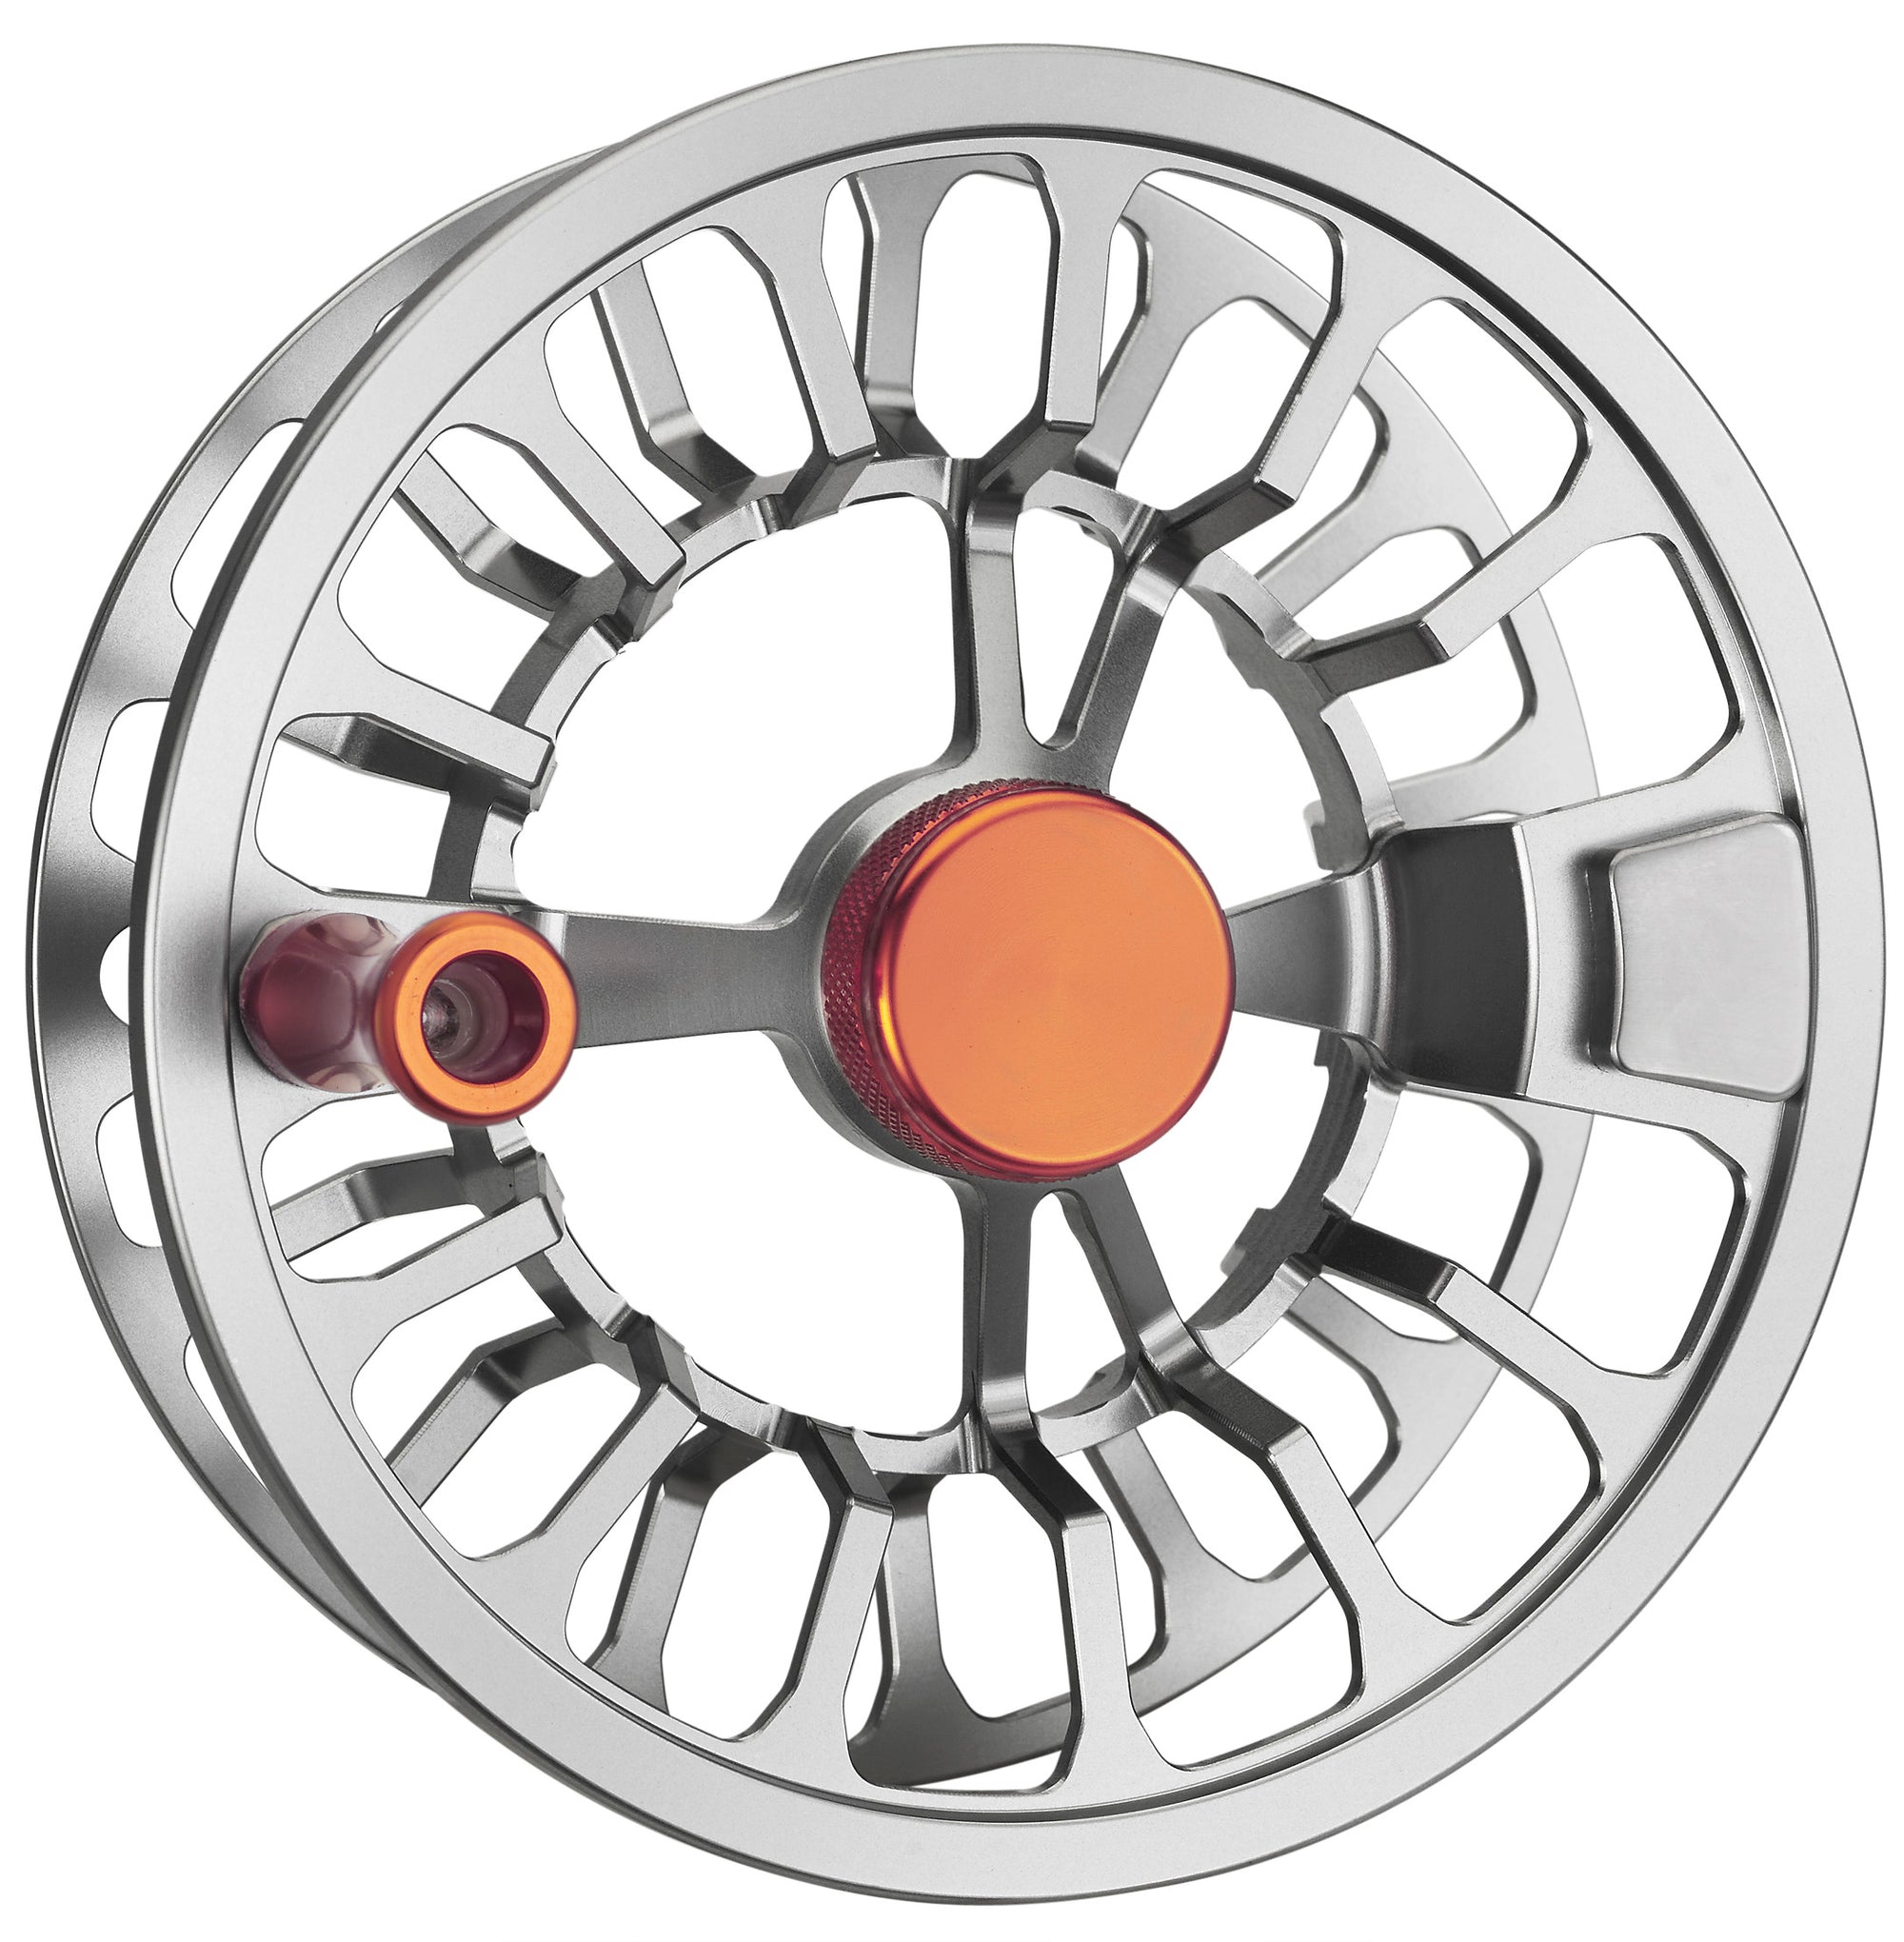 Cheeky Launch 350 Fly Reel